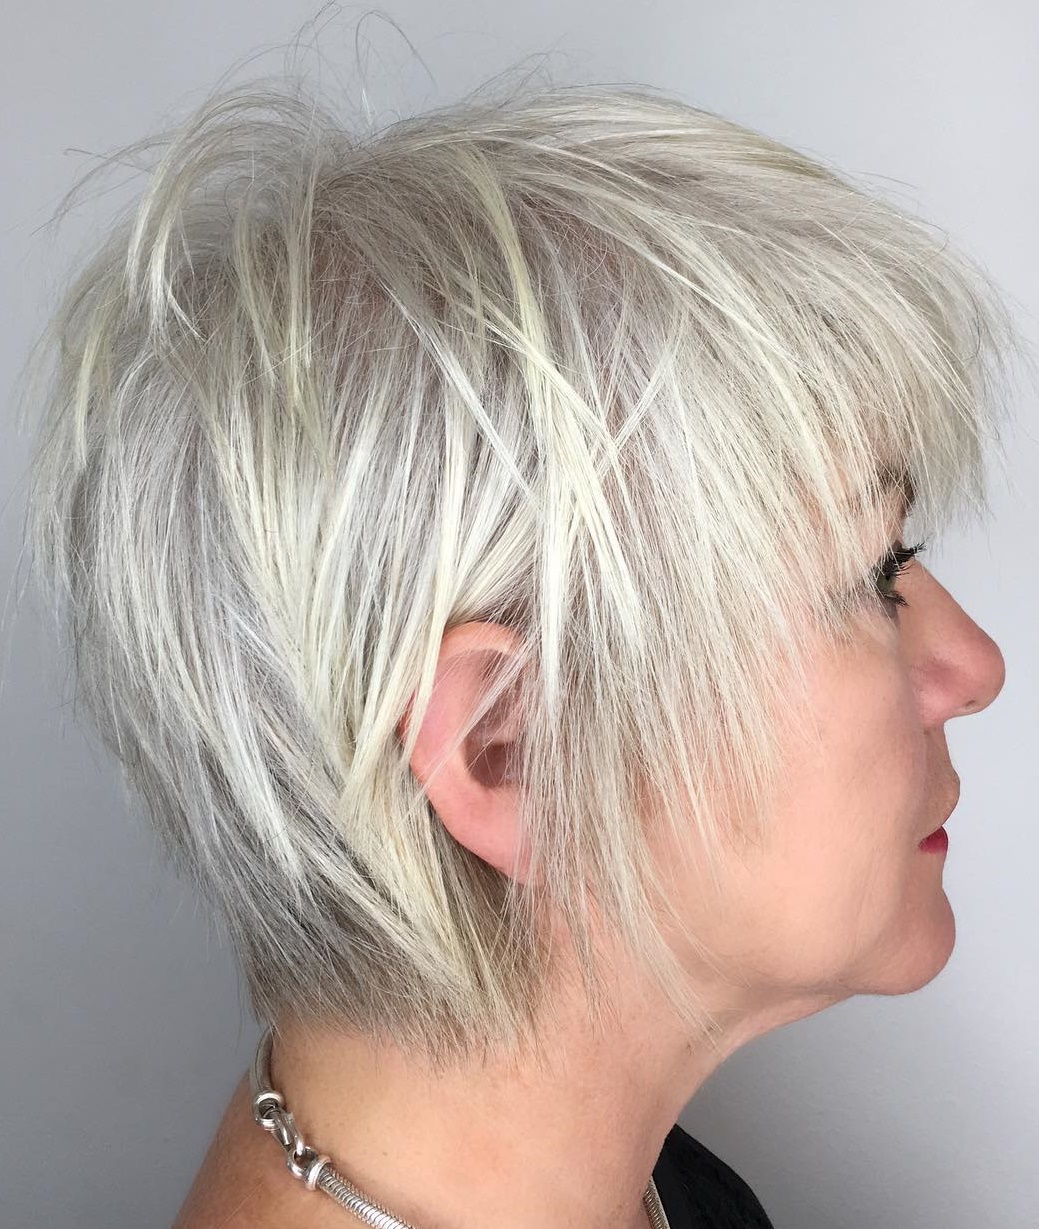 60 Best Hairstyles and Haircuts for Women Over 60 to Suit any Taste | Cool  hairstyles, Medium hair styles, Thick hair styles